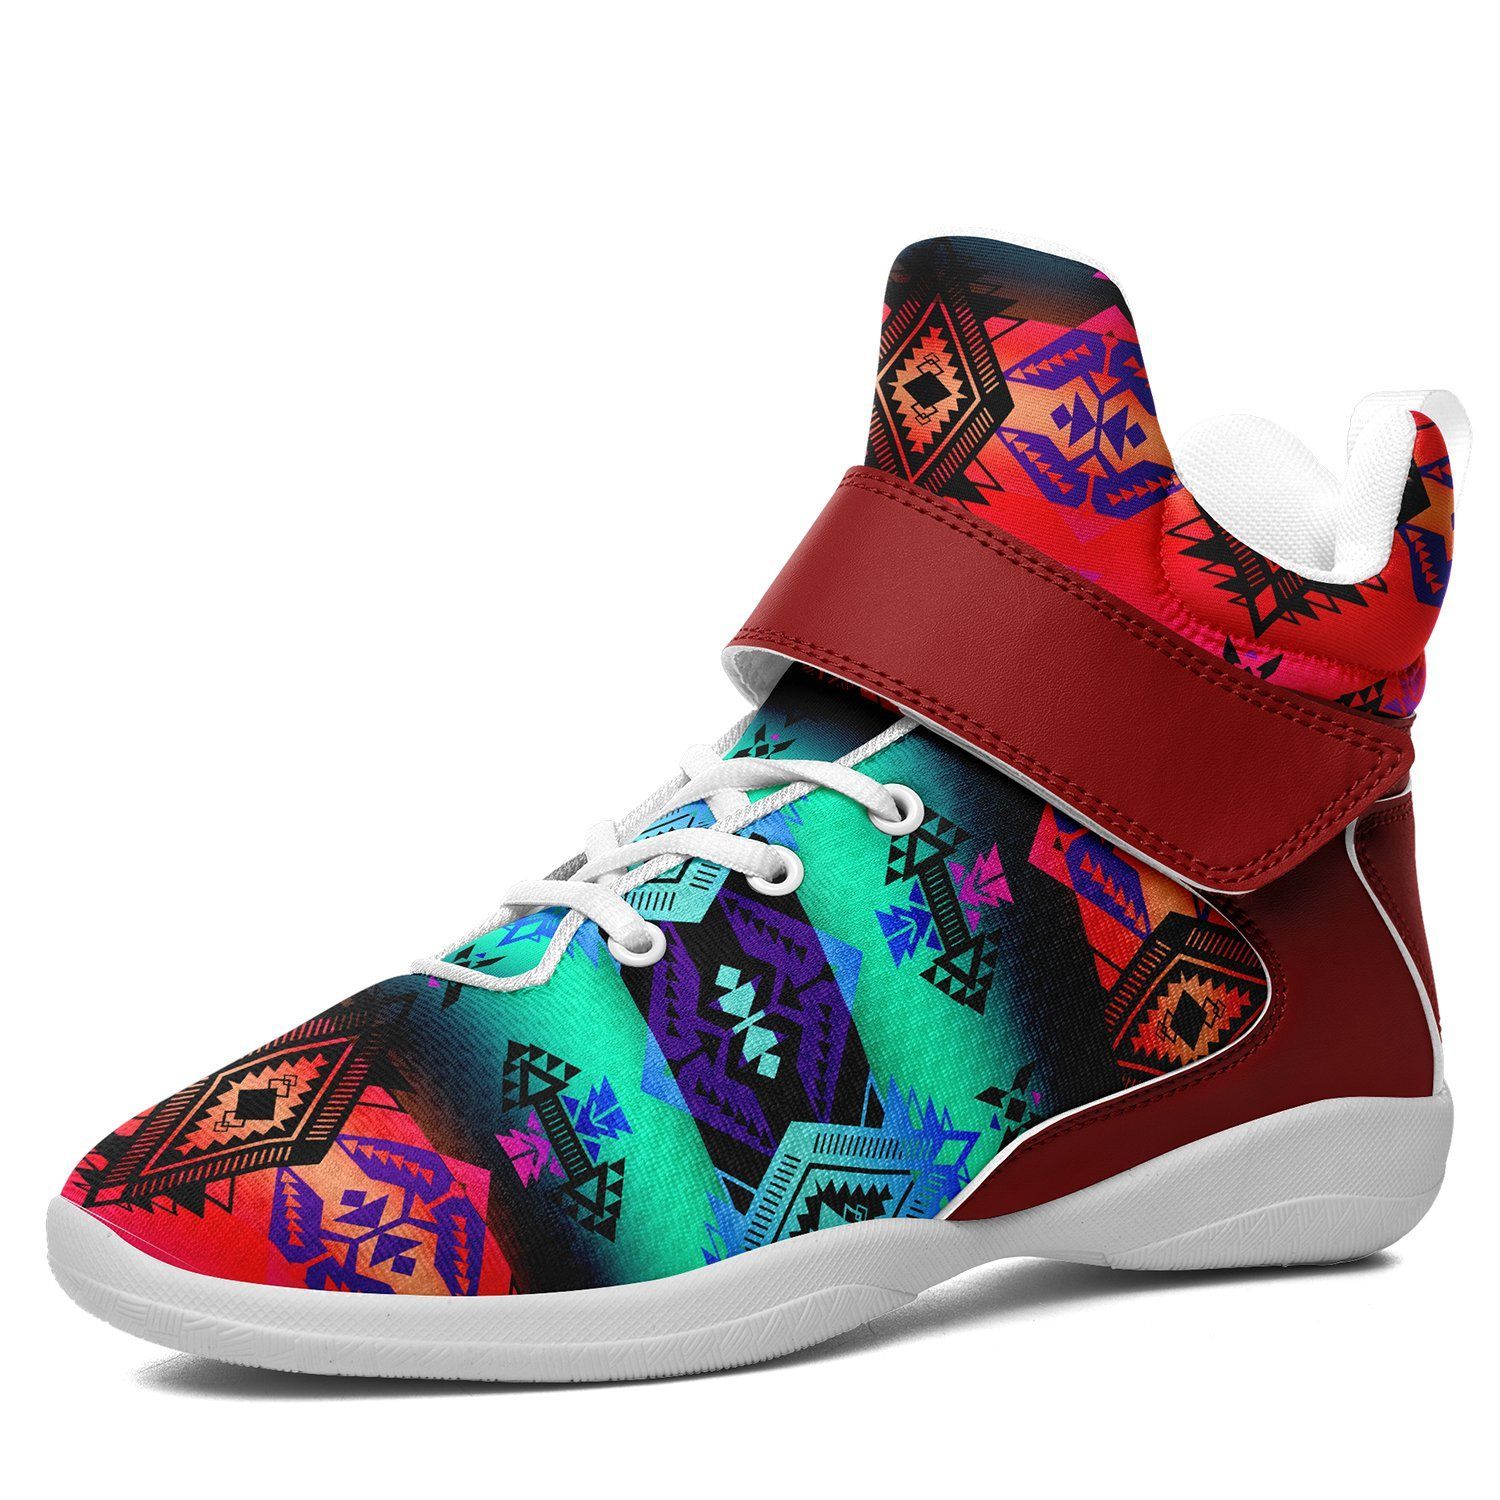 Sovereign Nation Sunrise Ipottaa Basketball / Sport High Top Shoes - White Sole 49 Dzine US Men 7 / EUR 40 White Sole with Red Strap 